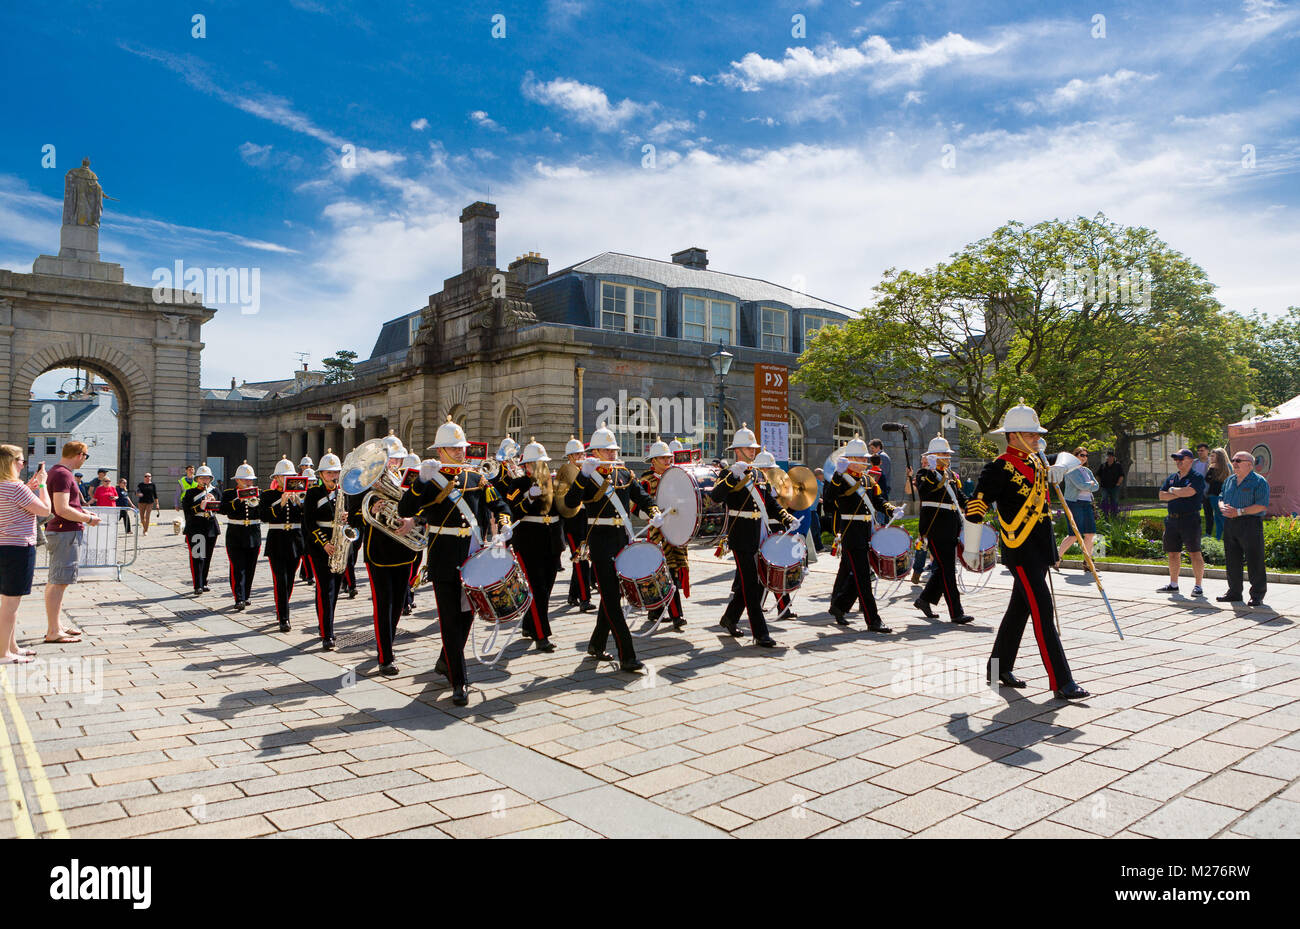 The Band of HM Royal Marines march through Plymouth's Royal William Yard on a bright sunny day. Stock Photo